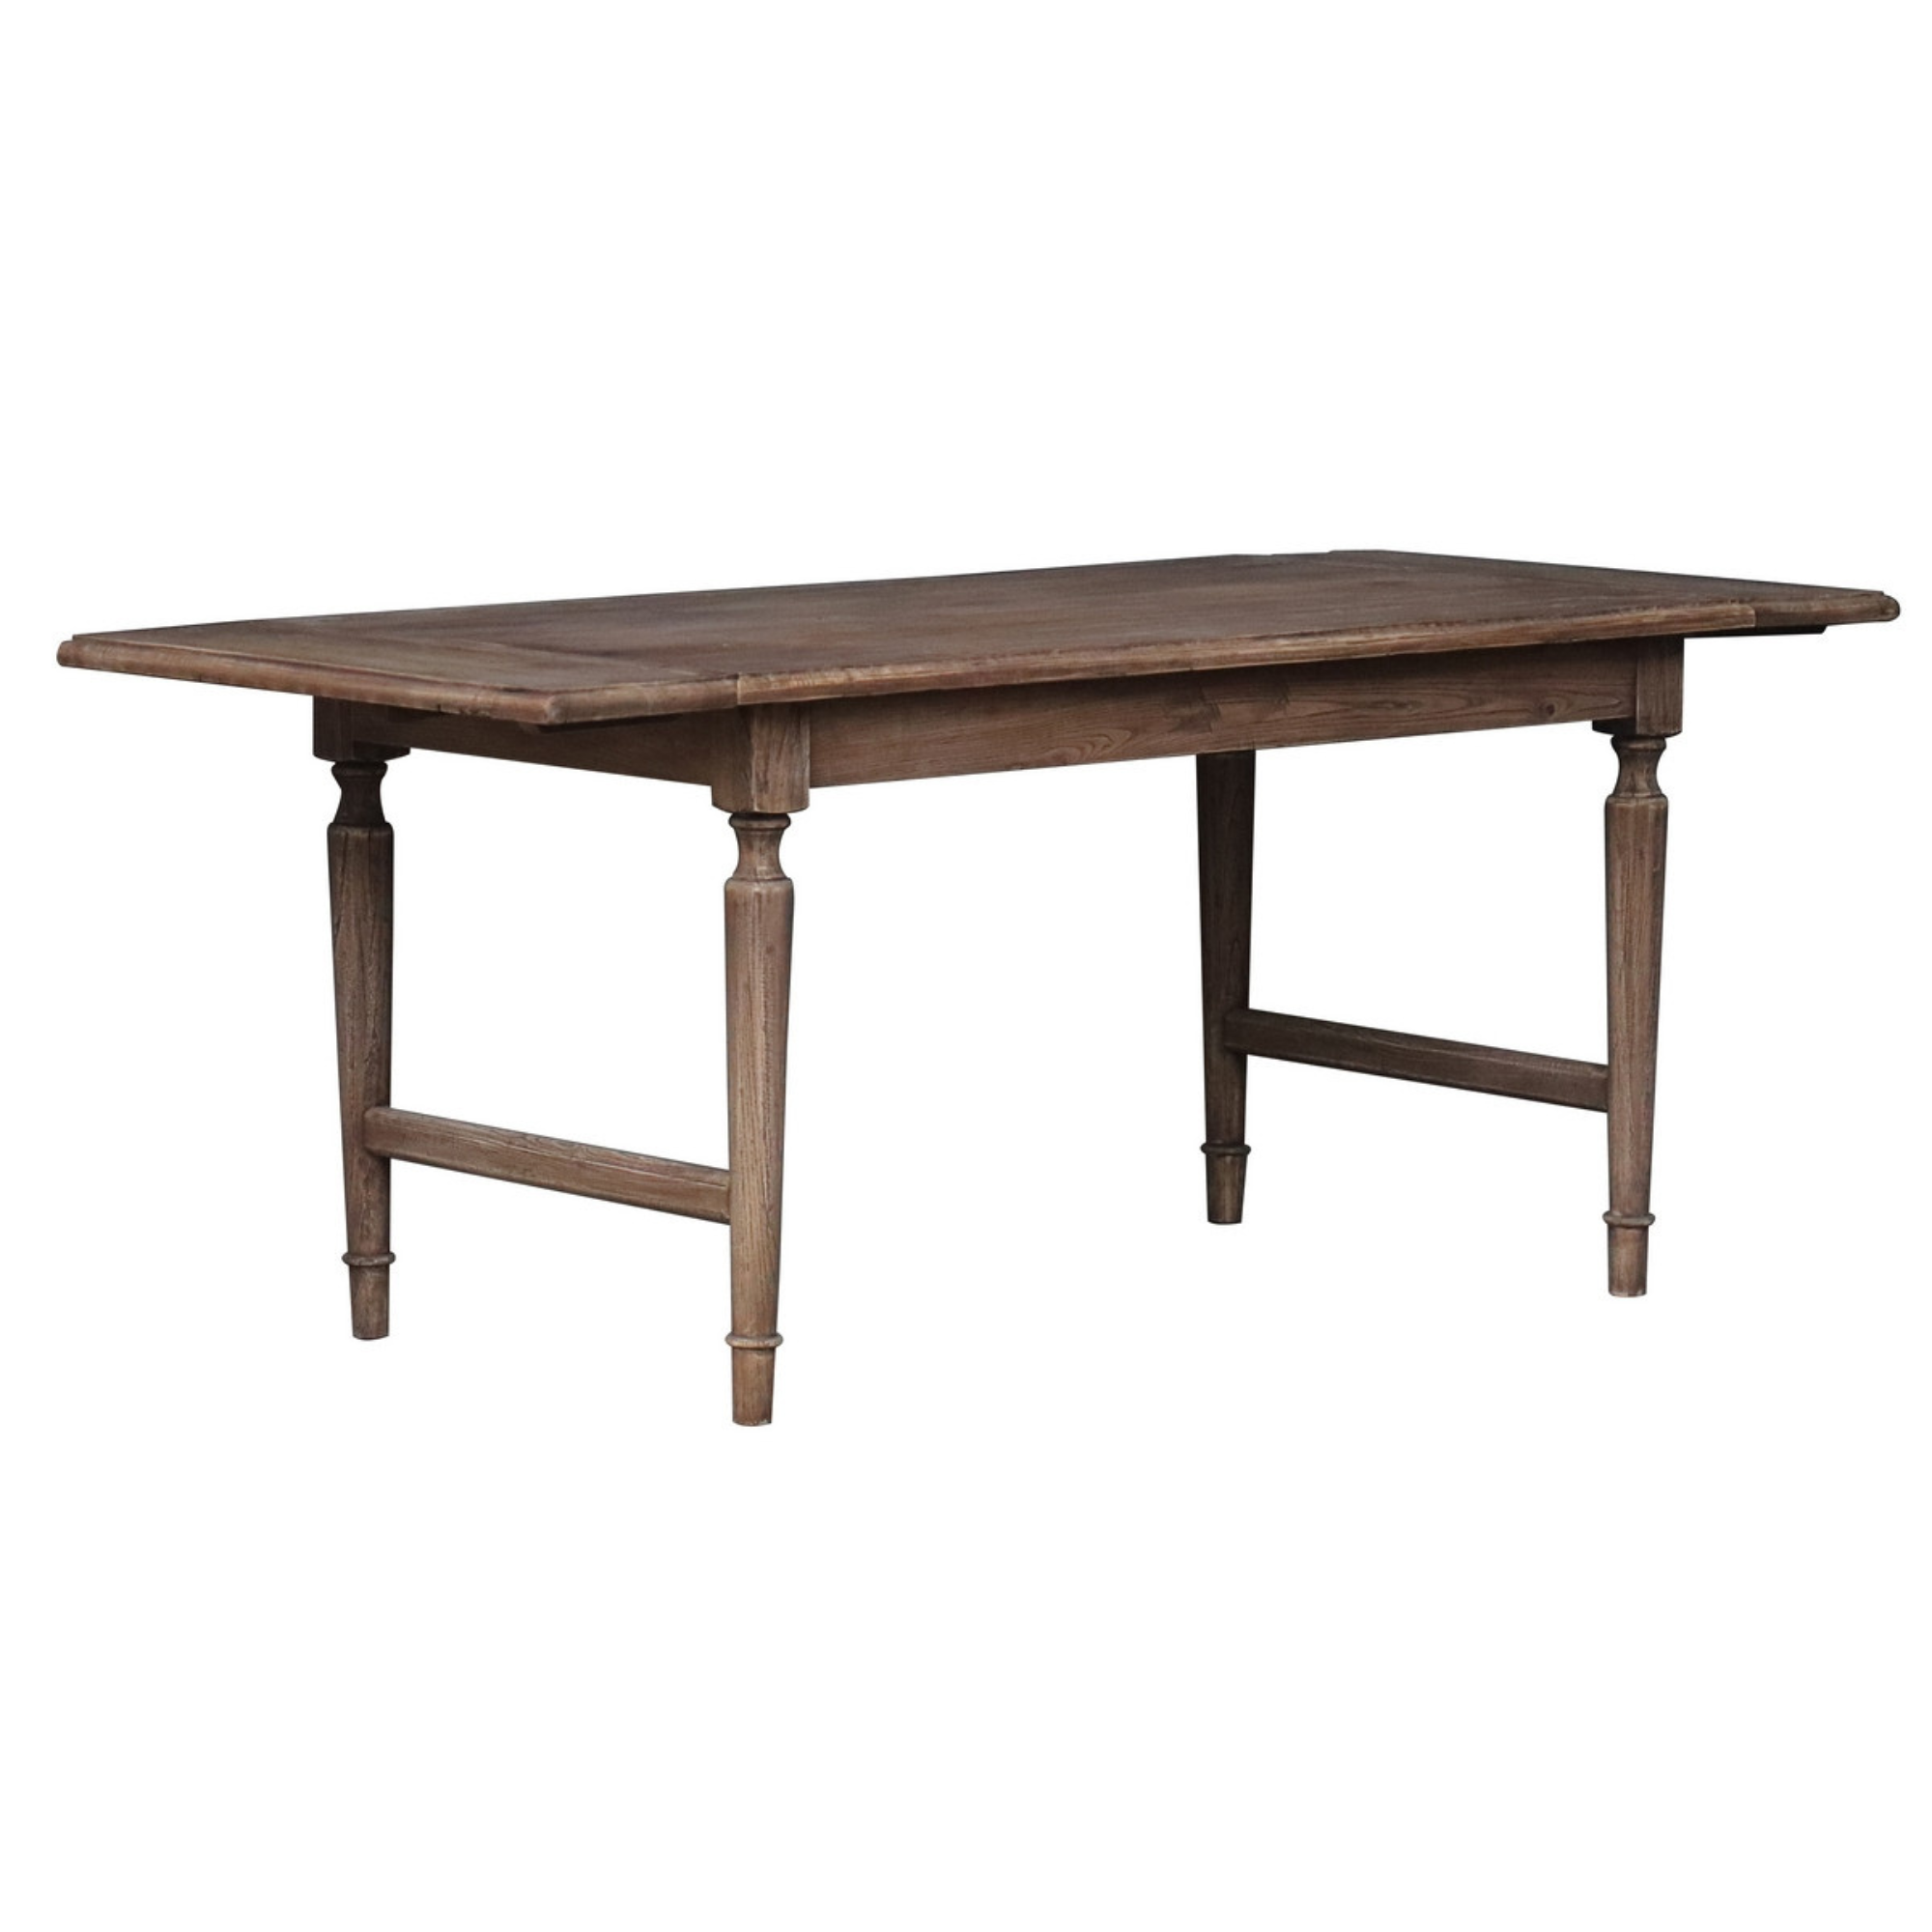 FRENCH VILLAGE OLD ELM EXTENSION TABLE